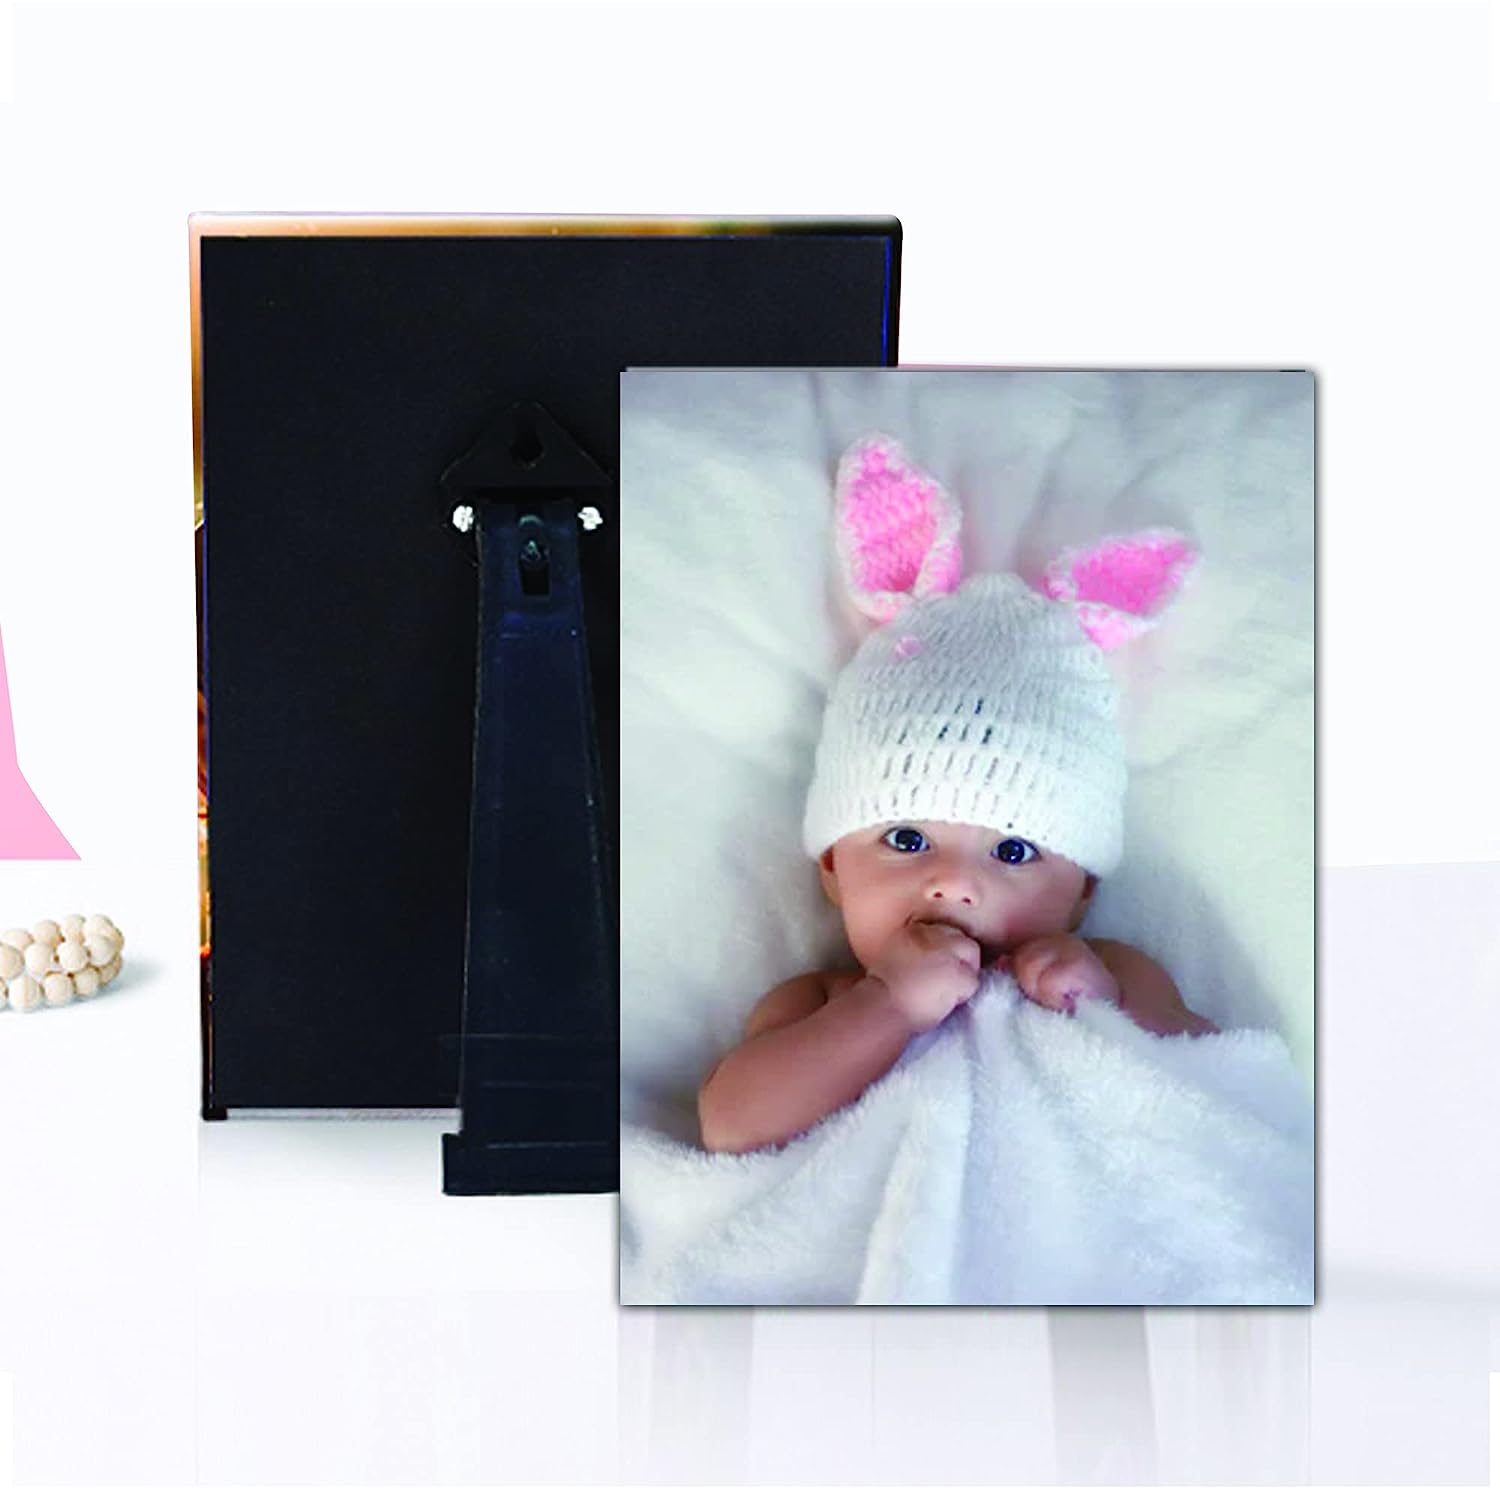 Timeless moments captured in personalized photo frames, perfect baby shower gifts.